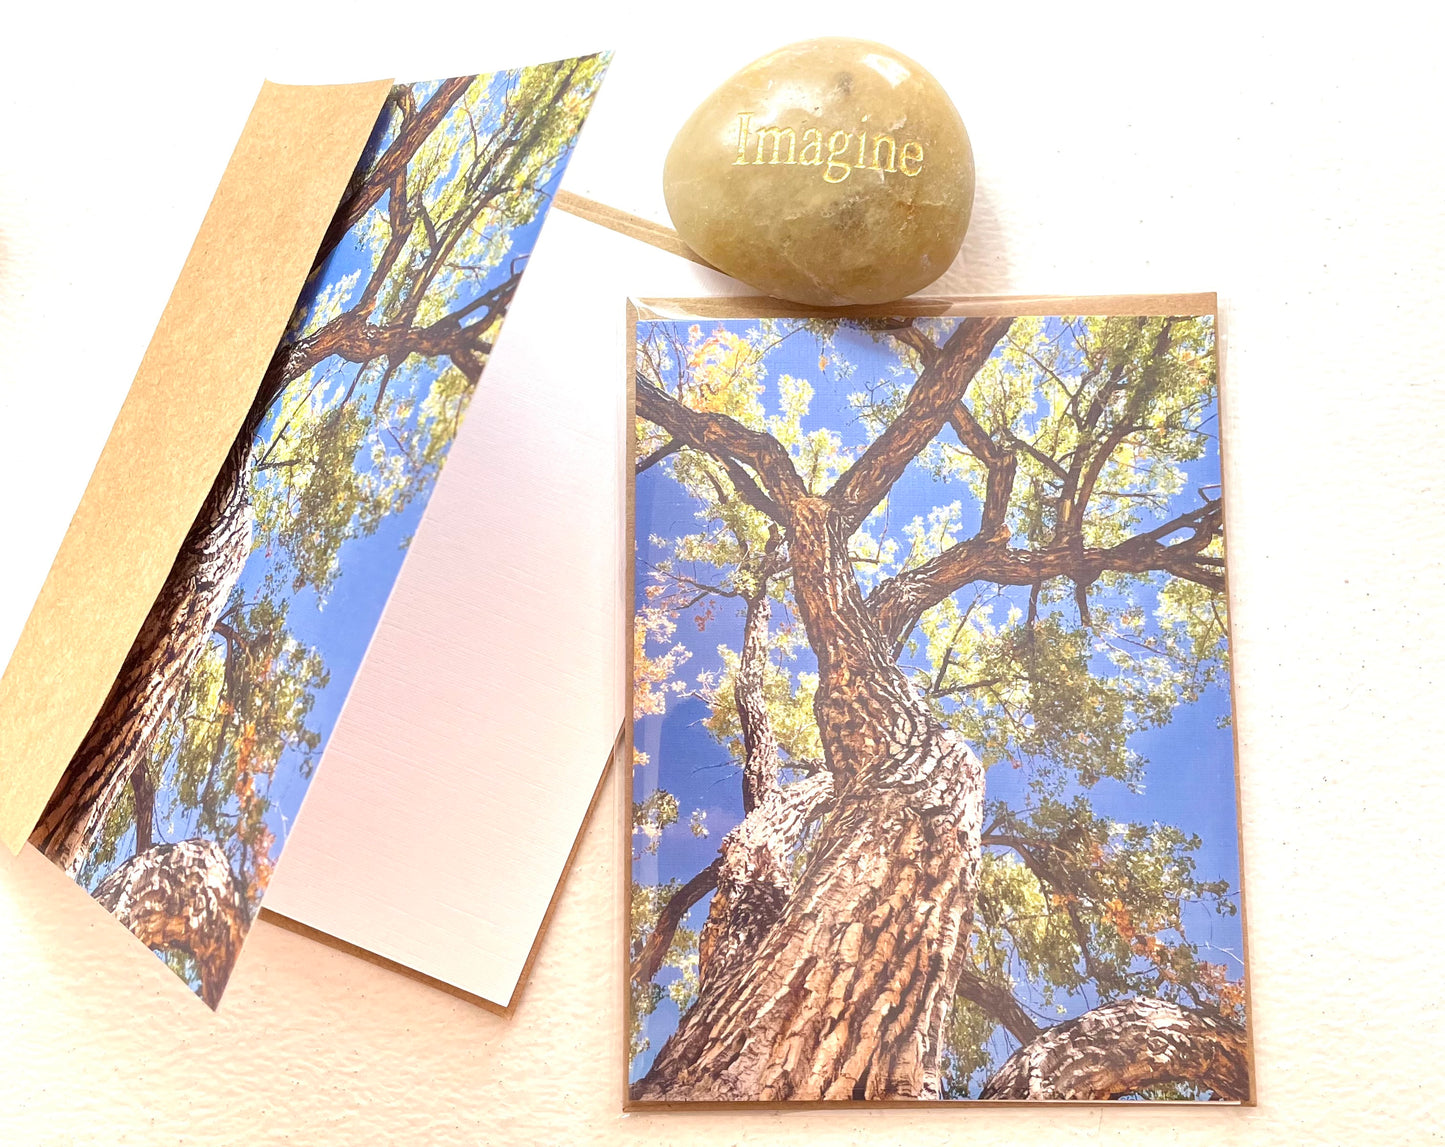 Magnificent Tree Original Nature Photography Greeting Card with Kraft Envelope